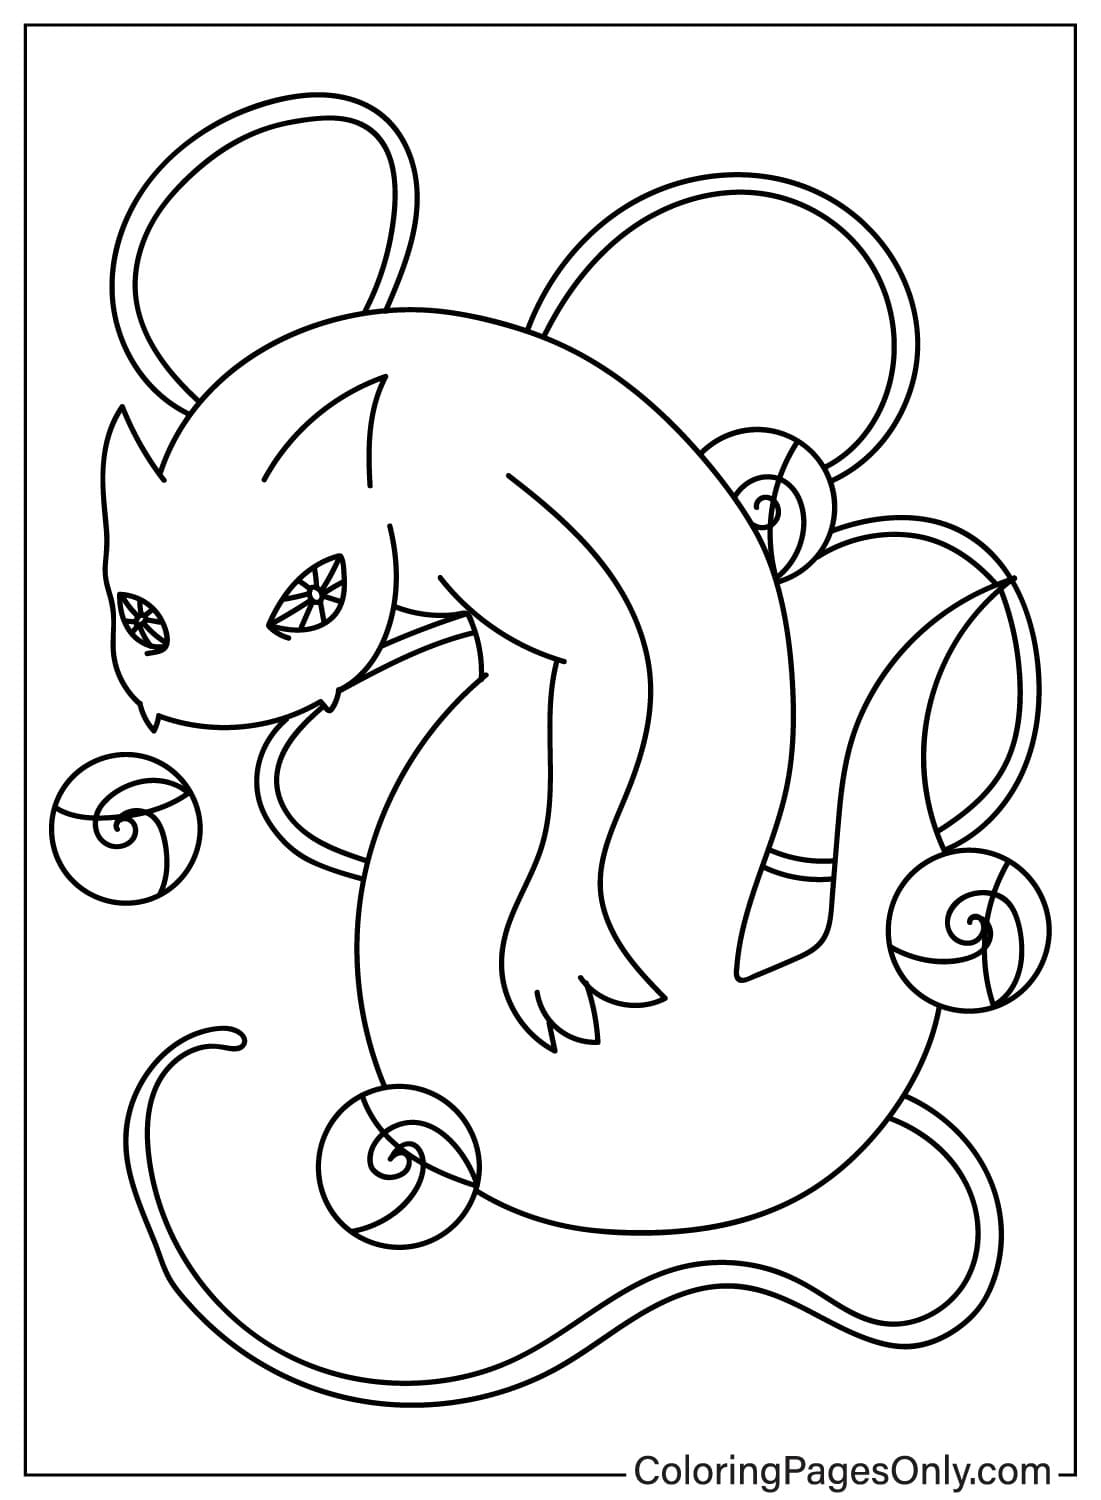 Ghazt Coloring Page JPG from Ghazt